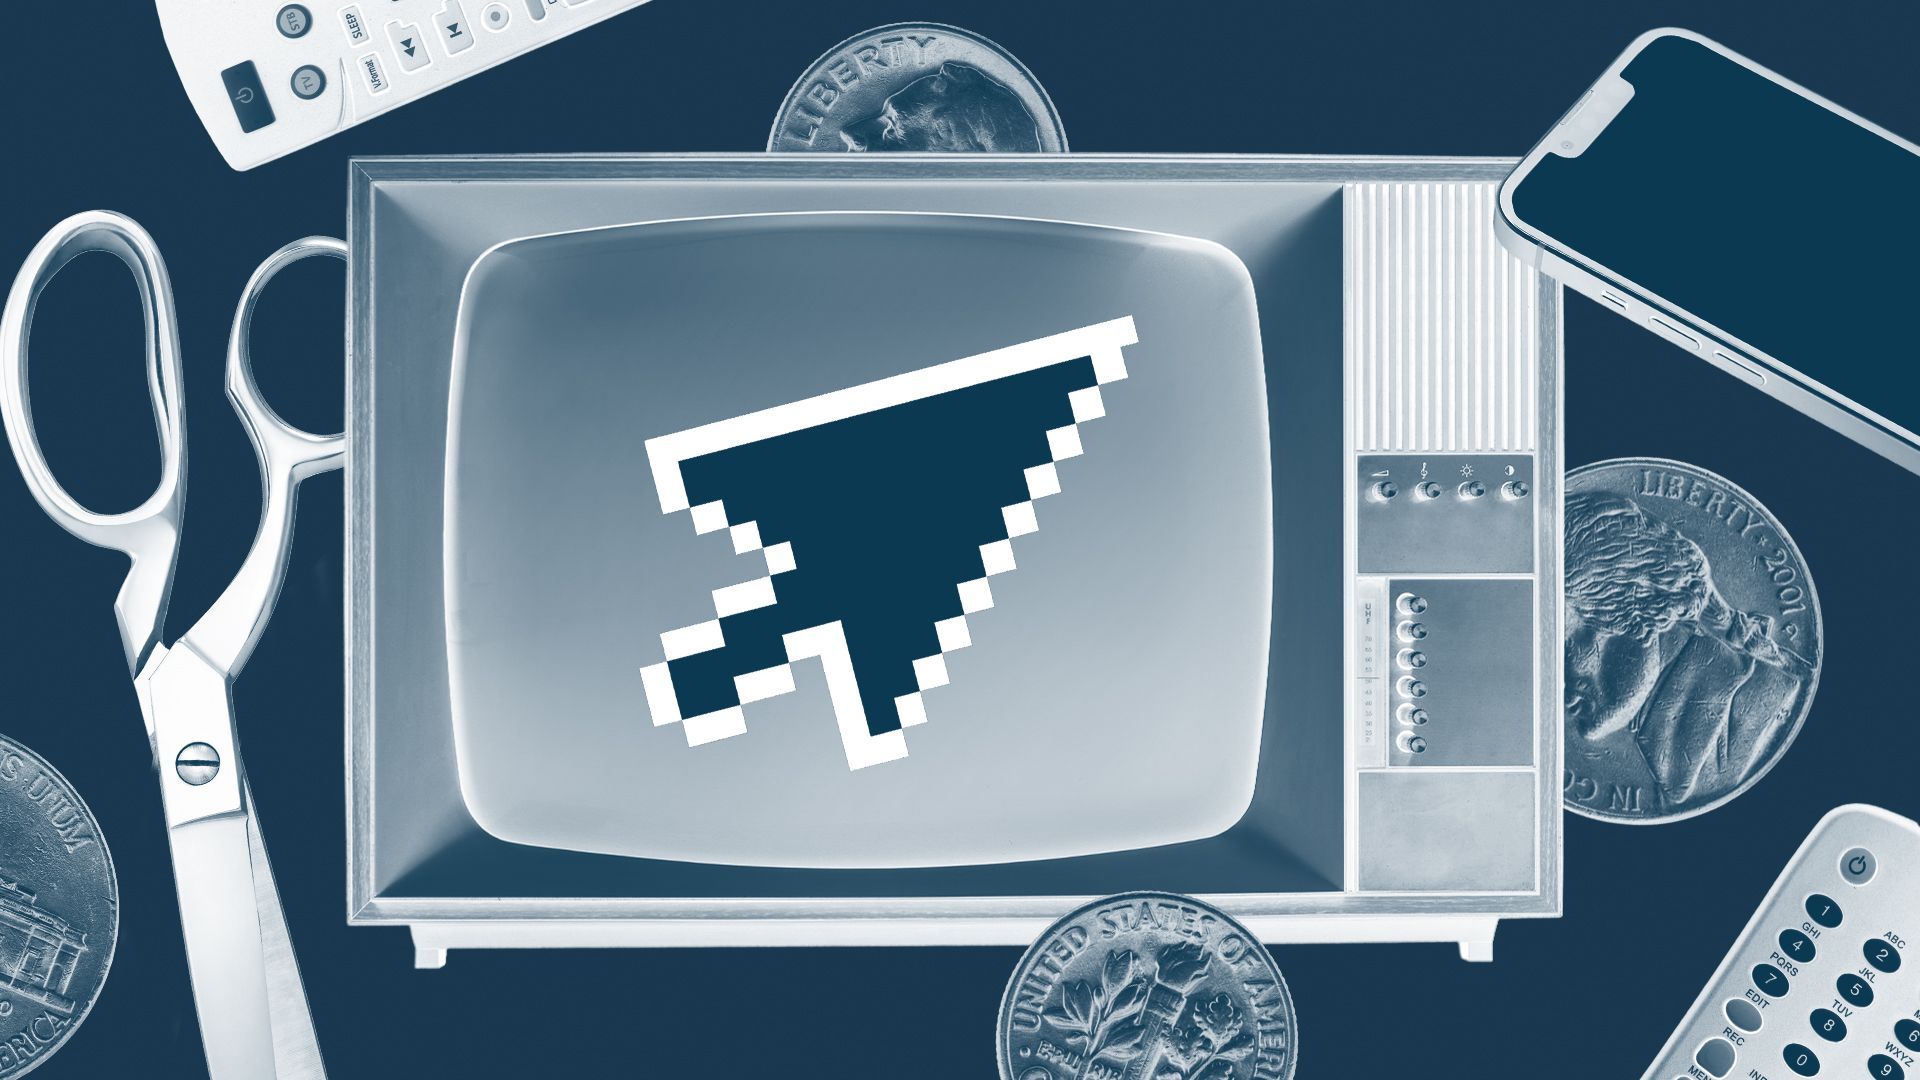 Illustration of a mouse cursor on a television screen